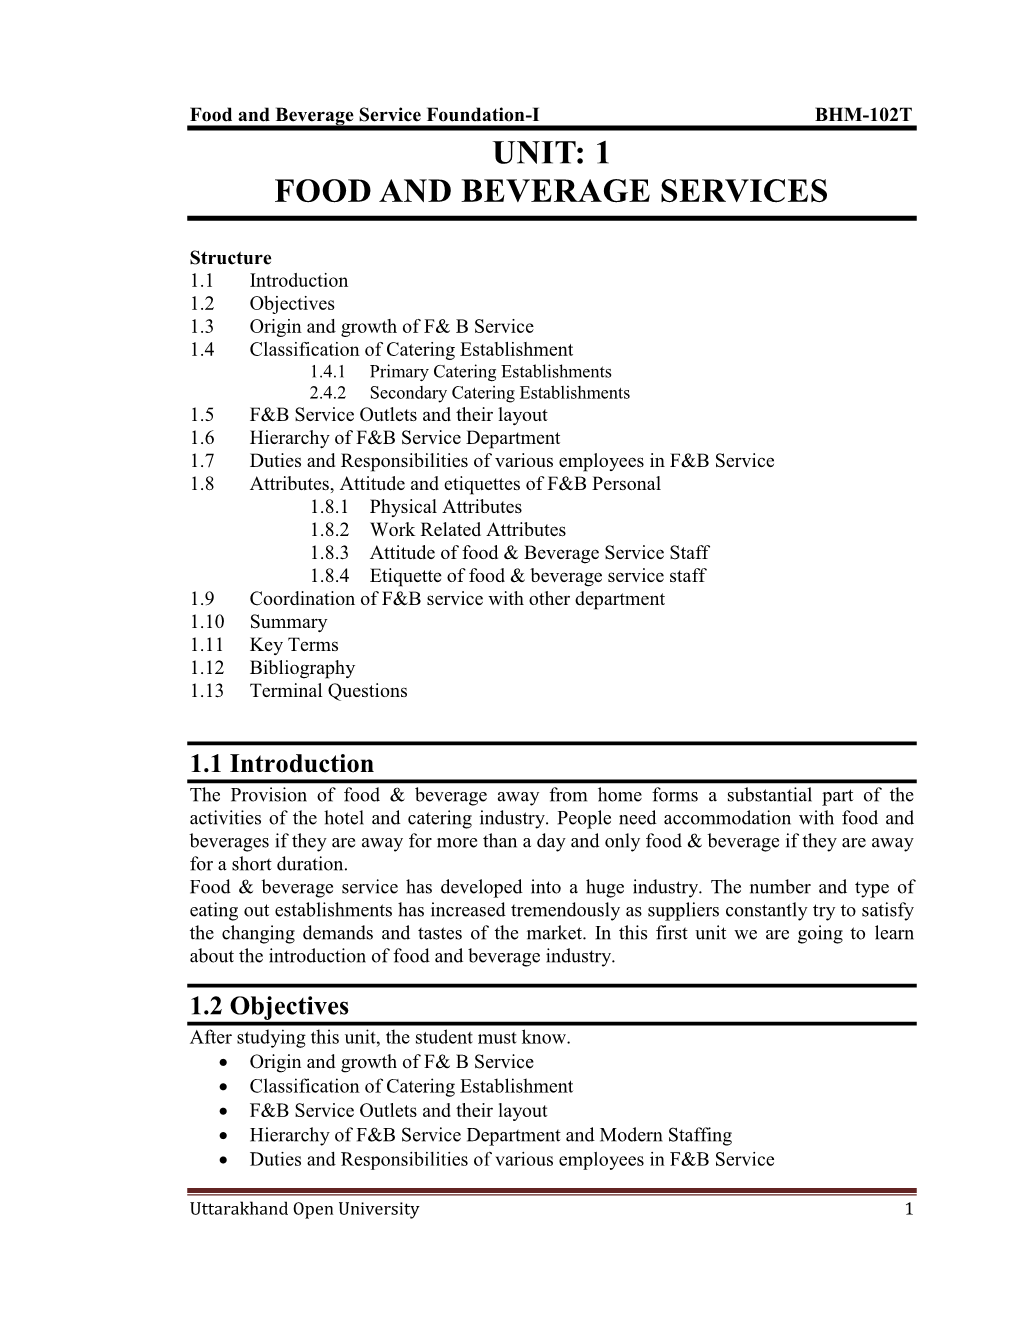 Unit: 1 Food and Beverage Services